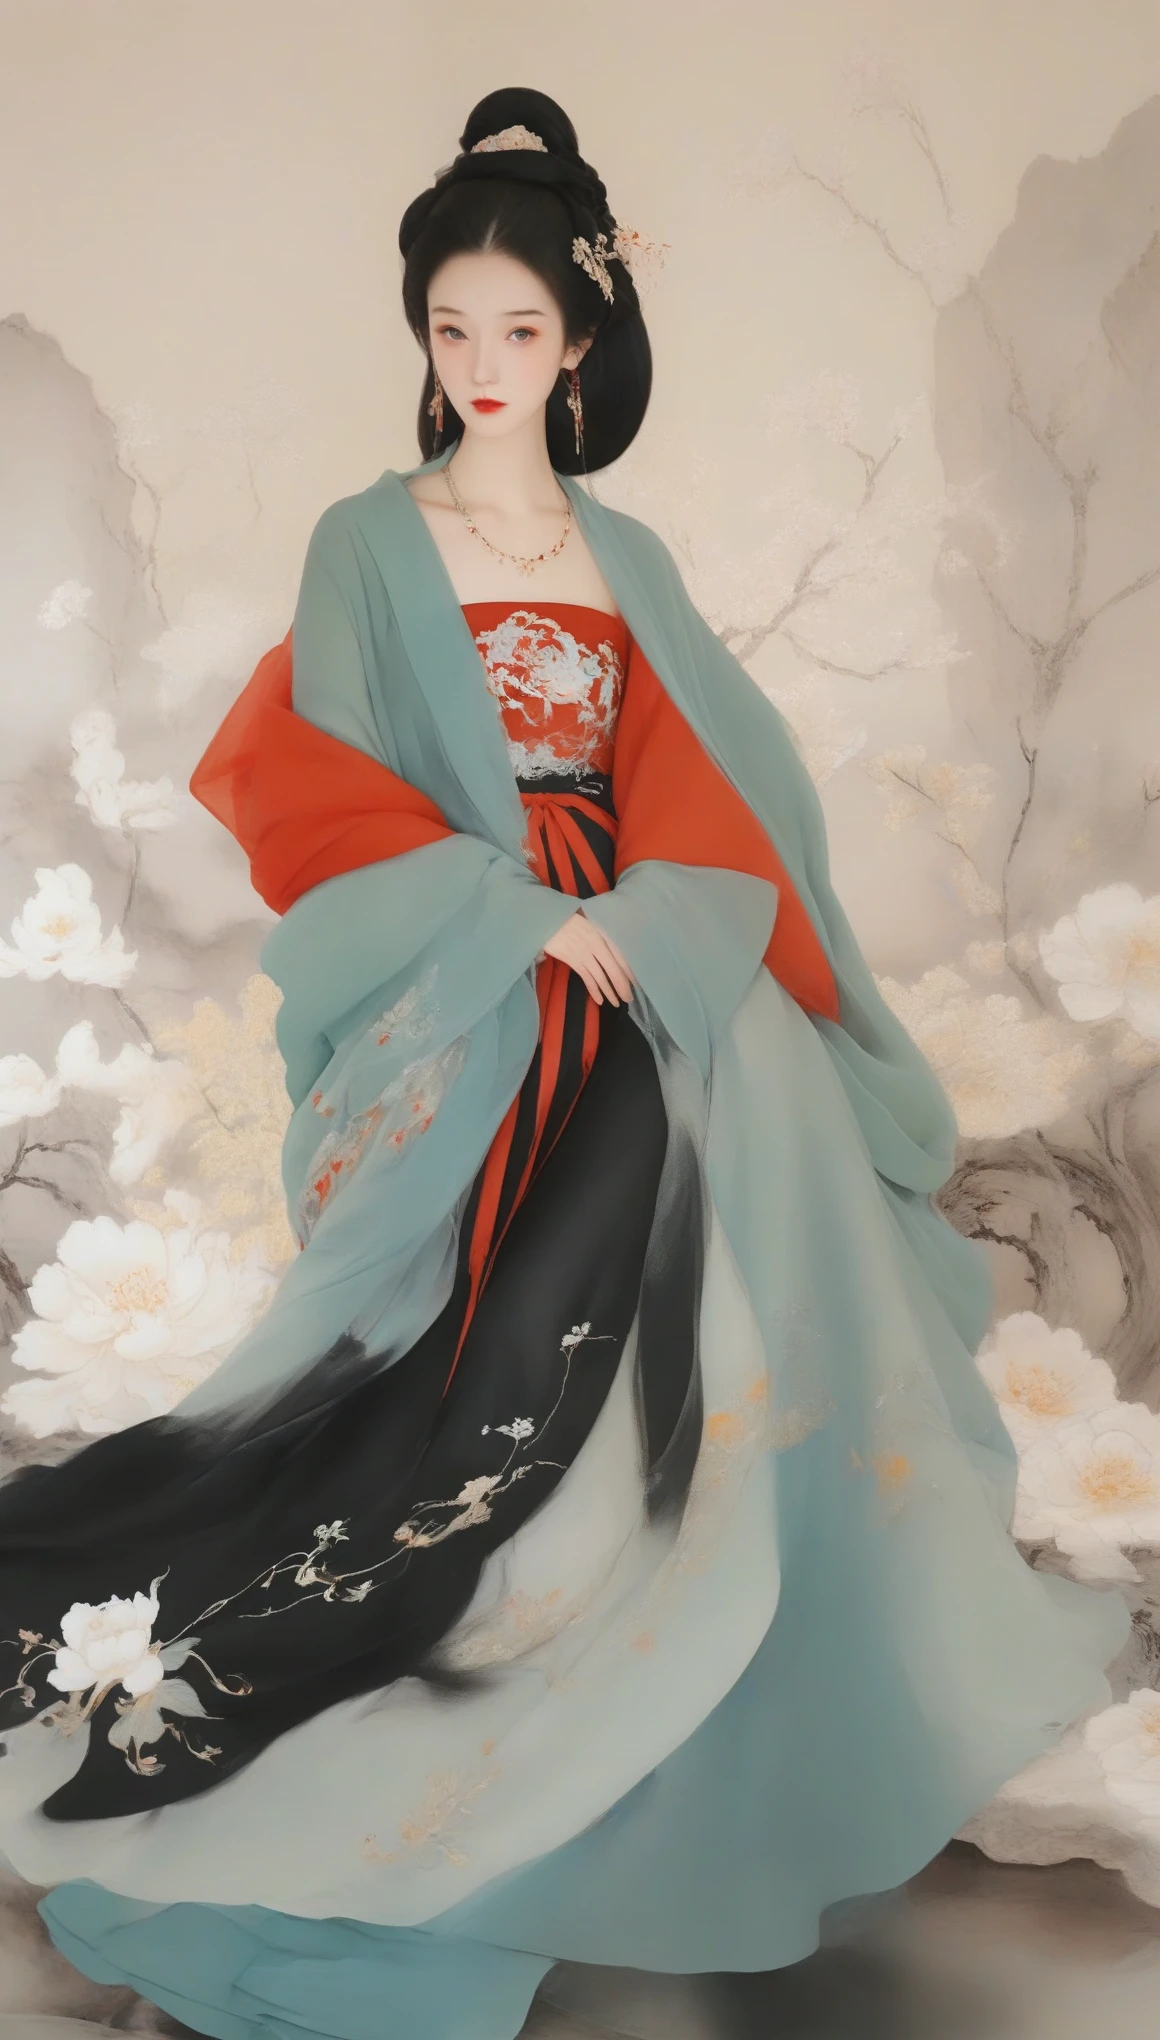 Wu Guanzhong&#39;s works，（Wang Zhaojun, a beauty from the Western Han Dynasty in China, holding a lute：0.13），（whole body），（Han Dynasty winter red hooded cloak coat：0.65），Falling geese，（lute：0.85），（Velvet）（mink clothes），Background is the desert with a plump and rounded appearance，Round face shape，The eyes are not big，Small nose，Lips are red and slightly upturned，Has long black hair，background：Falling geese，Wu Guanzhong conquered both China and the West outside the Great Snow，His oil paintings are fresh、Bright，Full of national characteristics and lyrical meaning。Later he engaged in innovating ink painting，His paintings are somewhere between figuration and abstraction，Points to note、The rhythm of blending lines and ink blocks，With strong artistic personality and modern flavor。